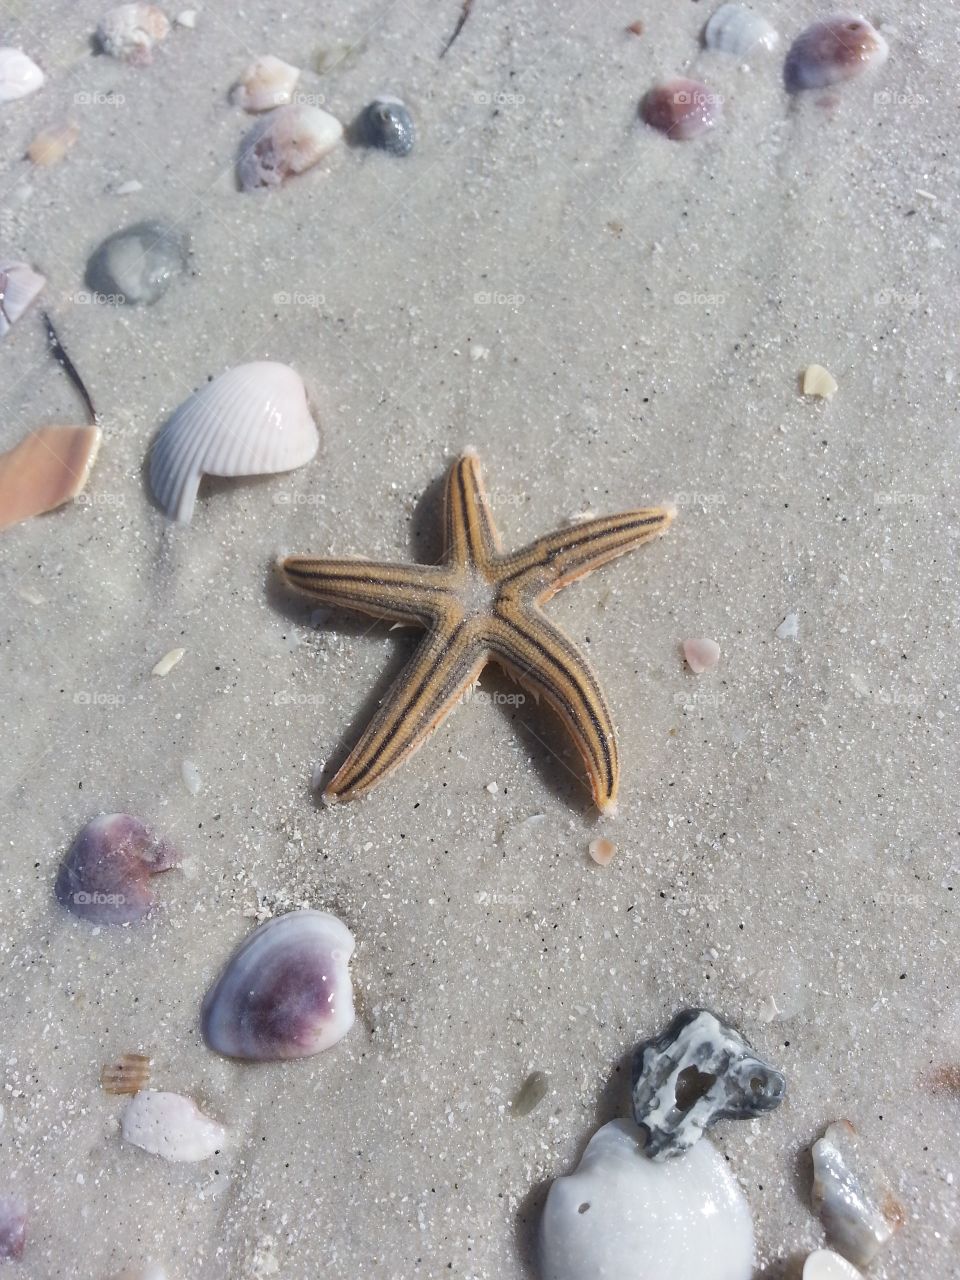 Sea Star on a Sunny Florida Beach - Starfish with Seashells in the Beautiful Sand - Relaxing Beach Vacation Travel Destination 